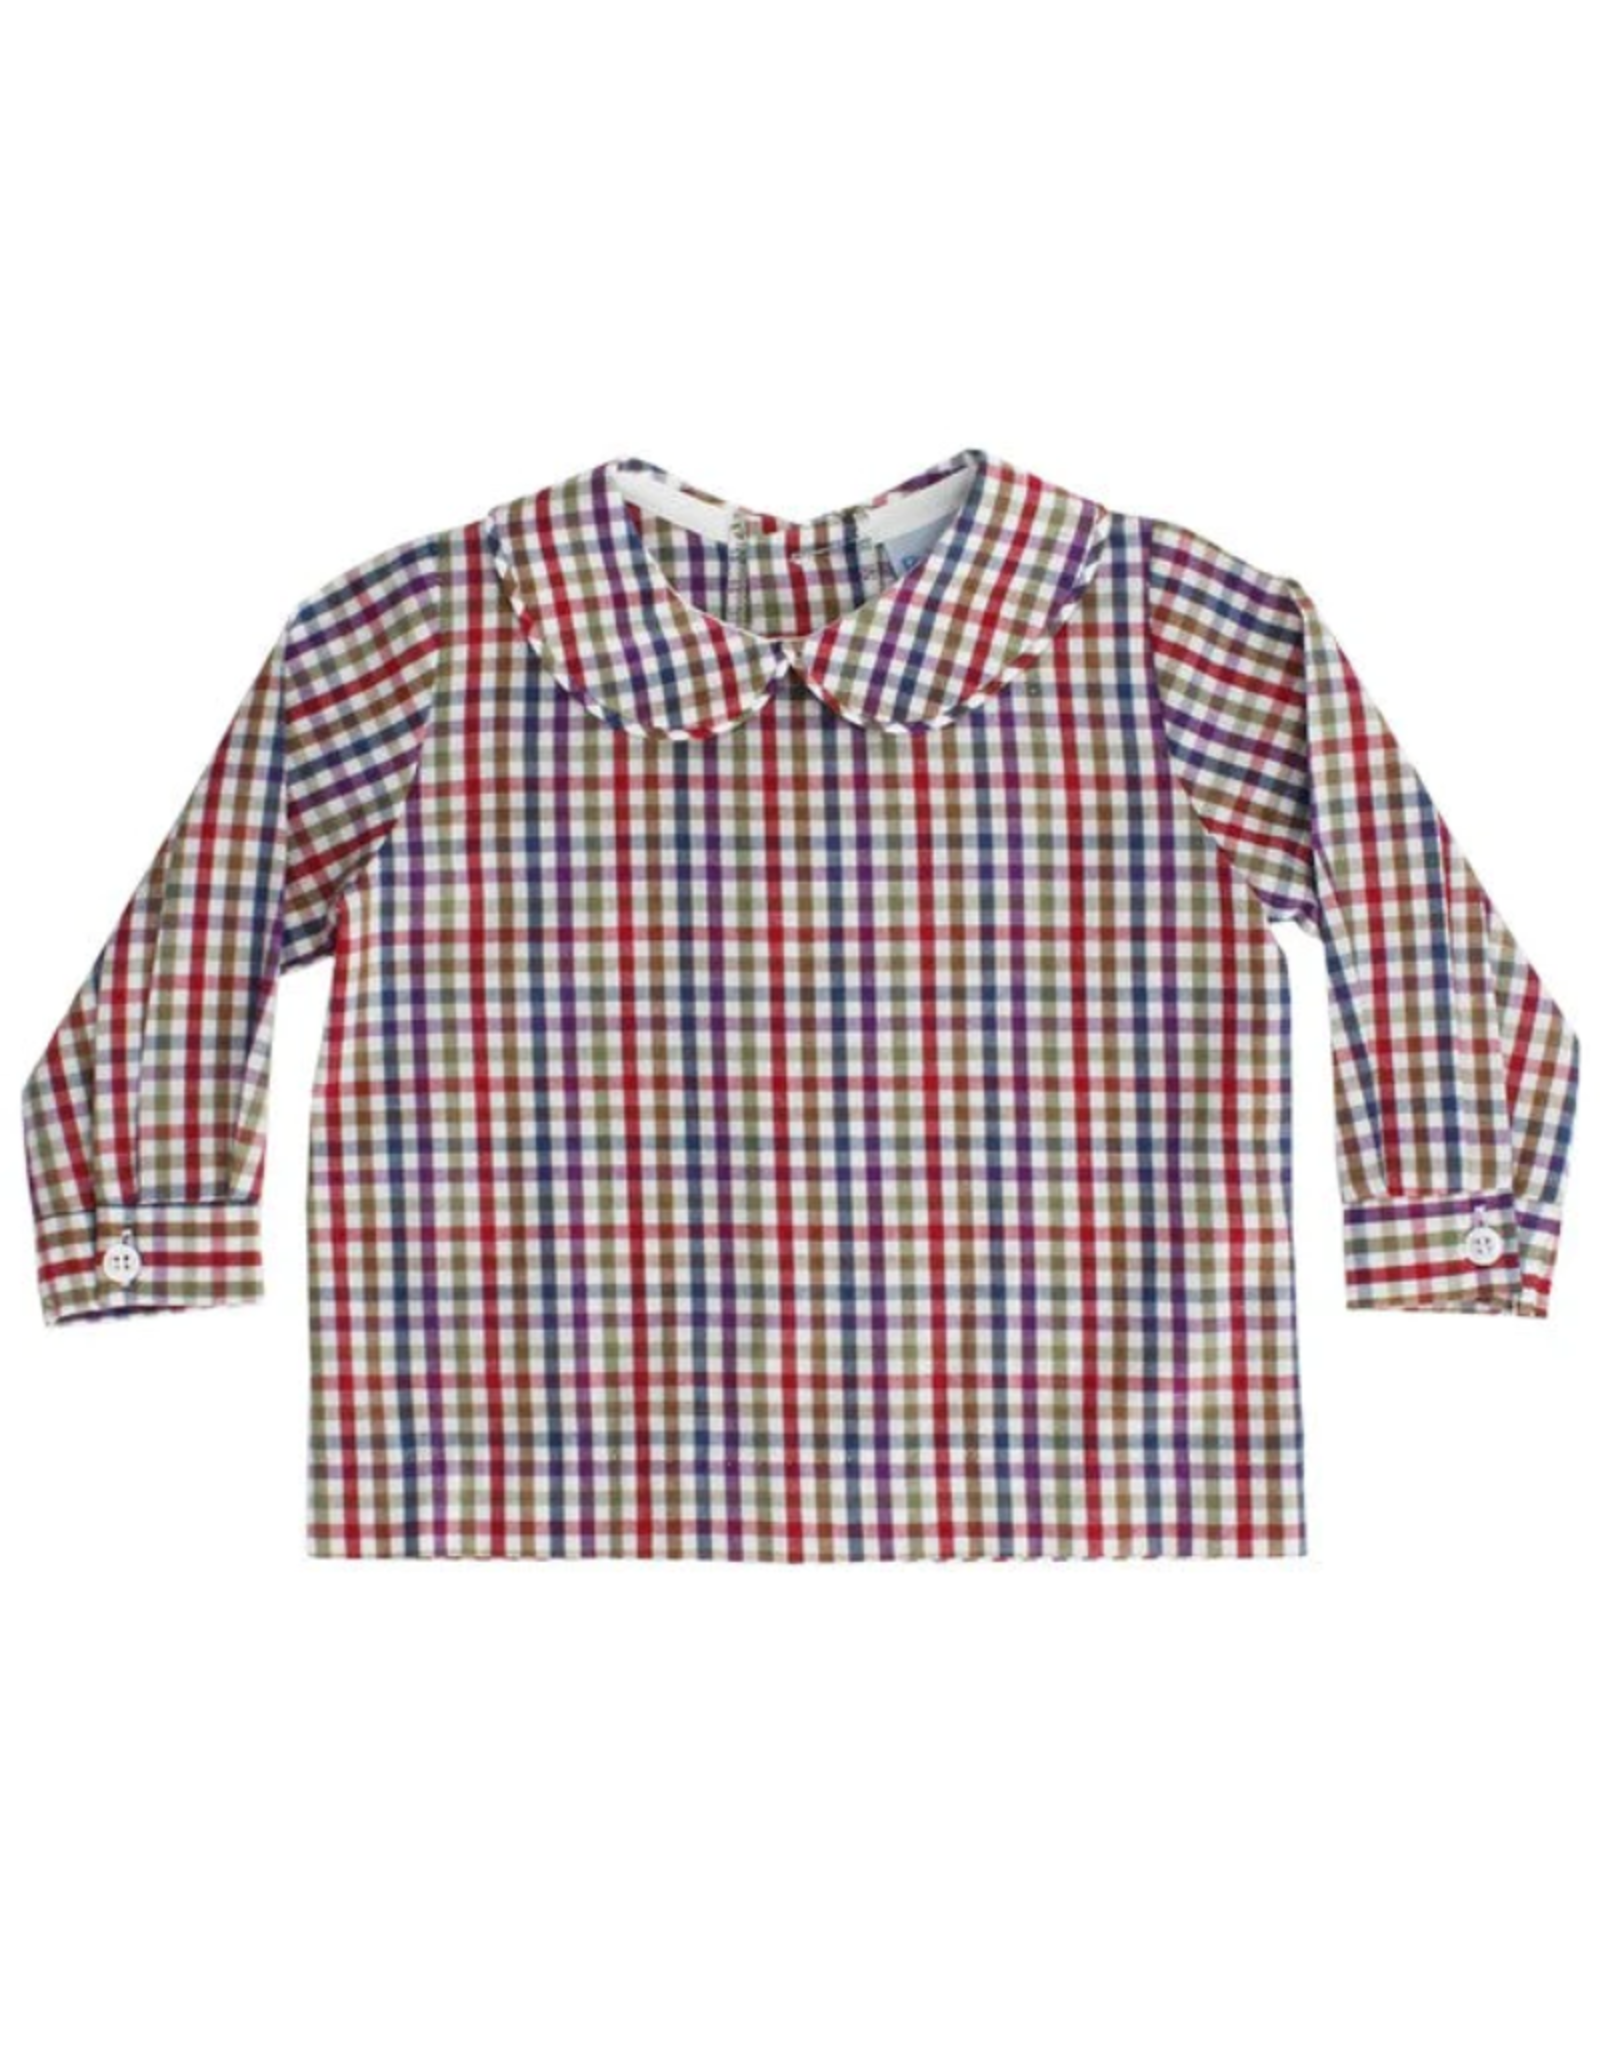 The Bailey Boys Banks Plaid/Biscuit Piped Shirt